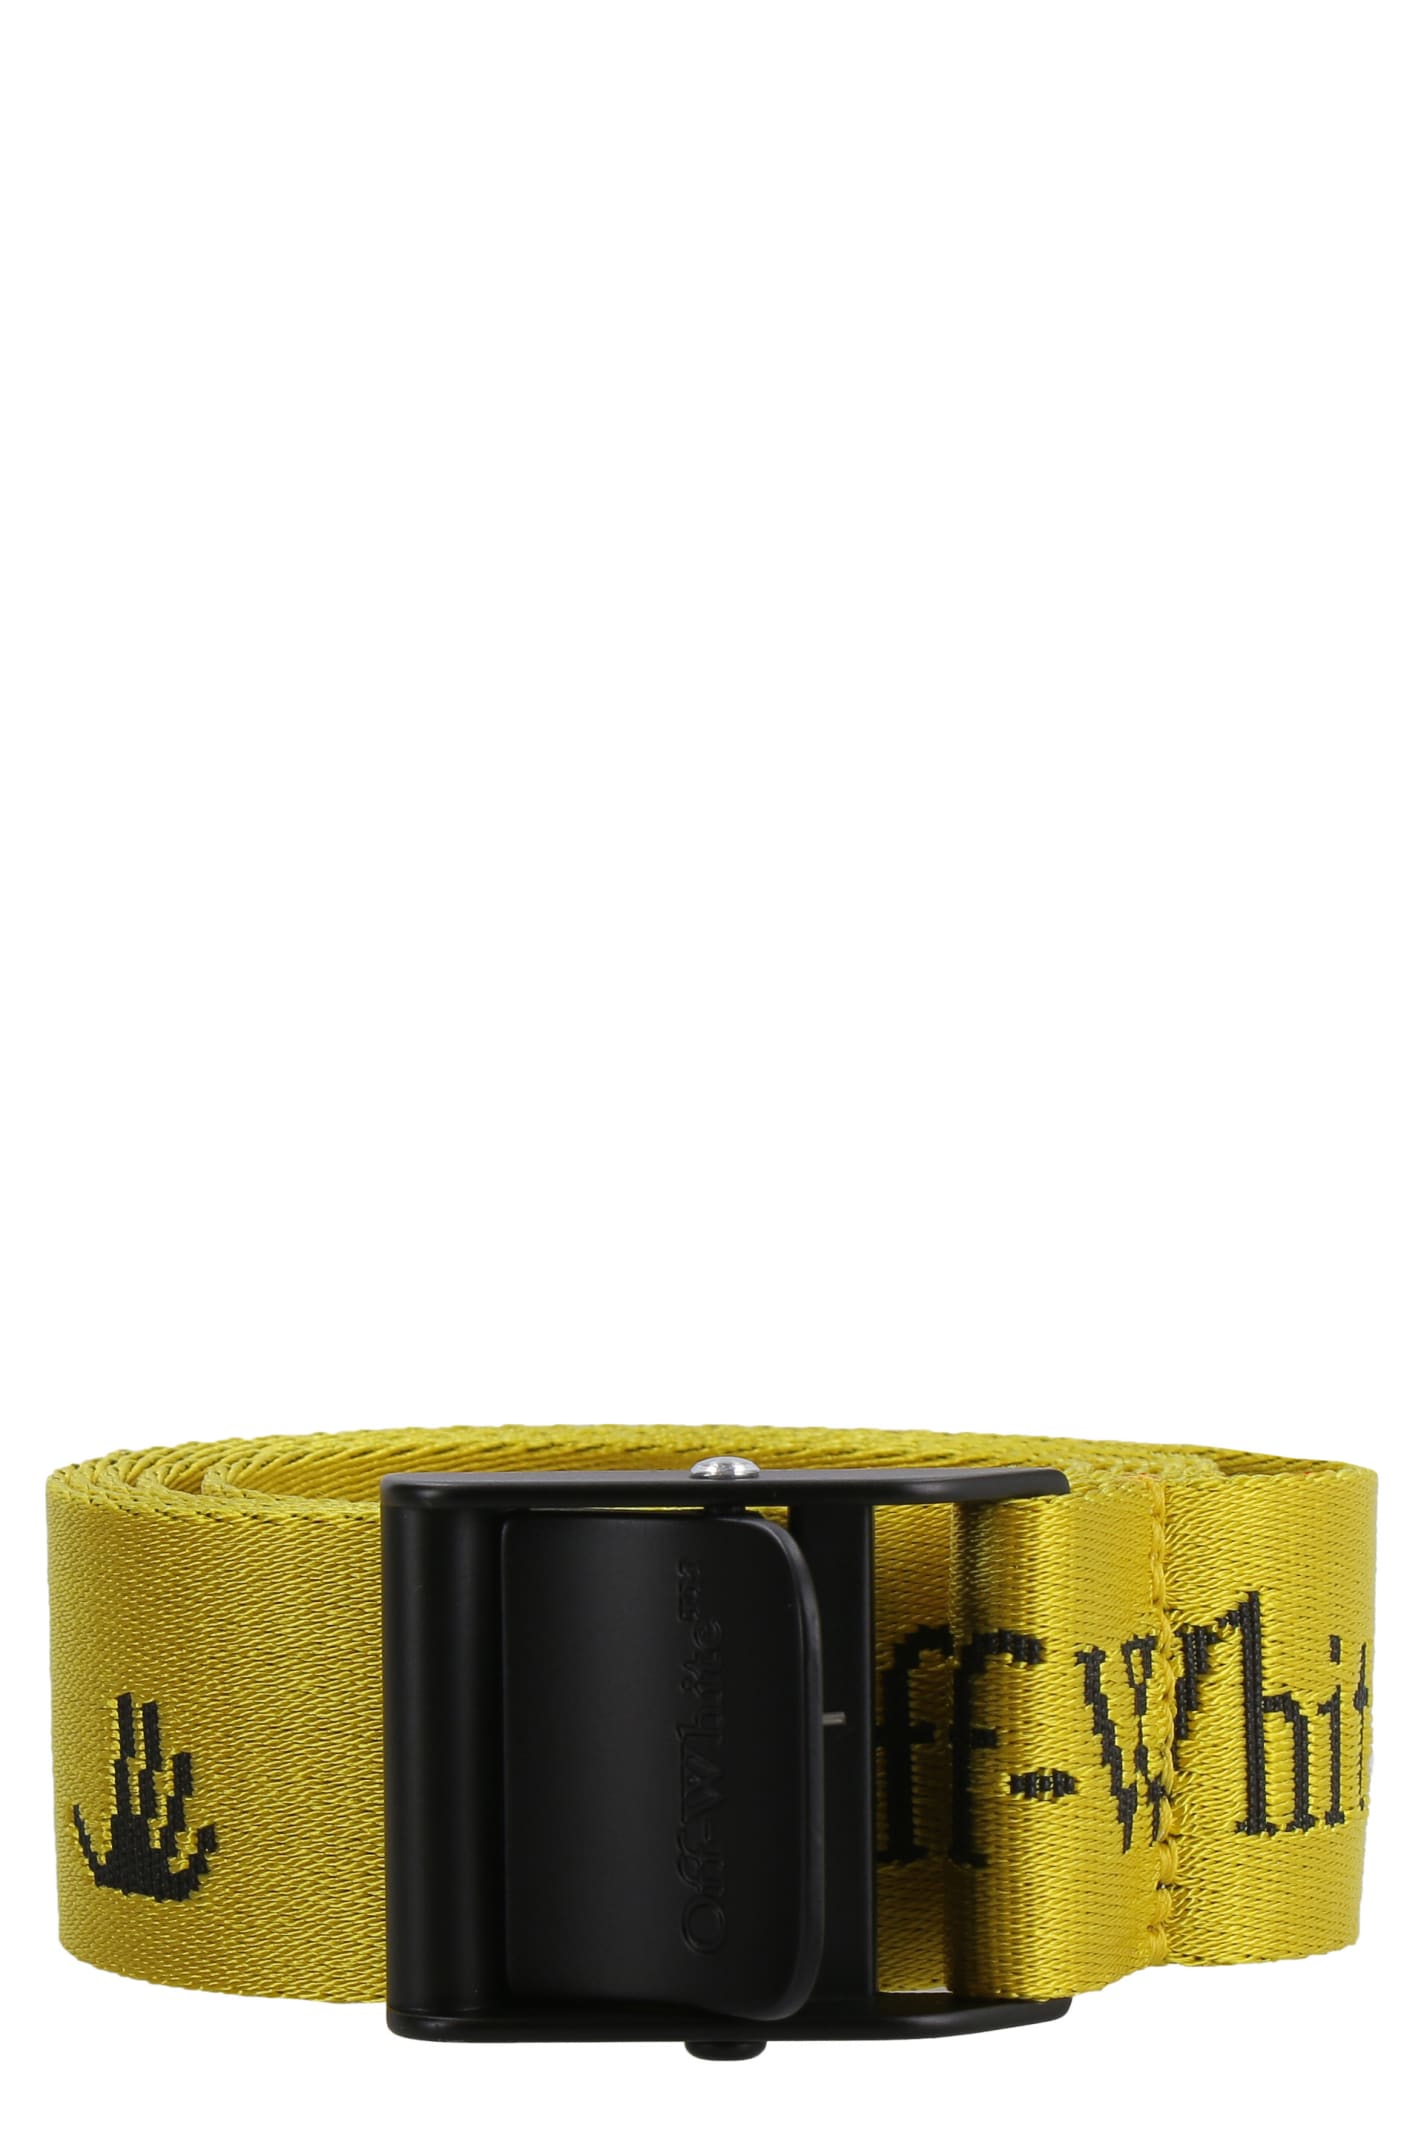 OFF-WHITE INDUSTRIAL FABRIC BELT,OWRB035E20FAB001 1810